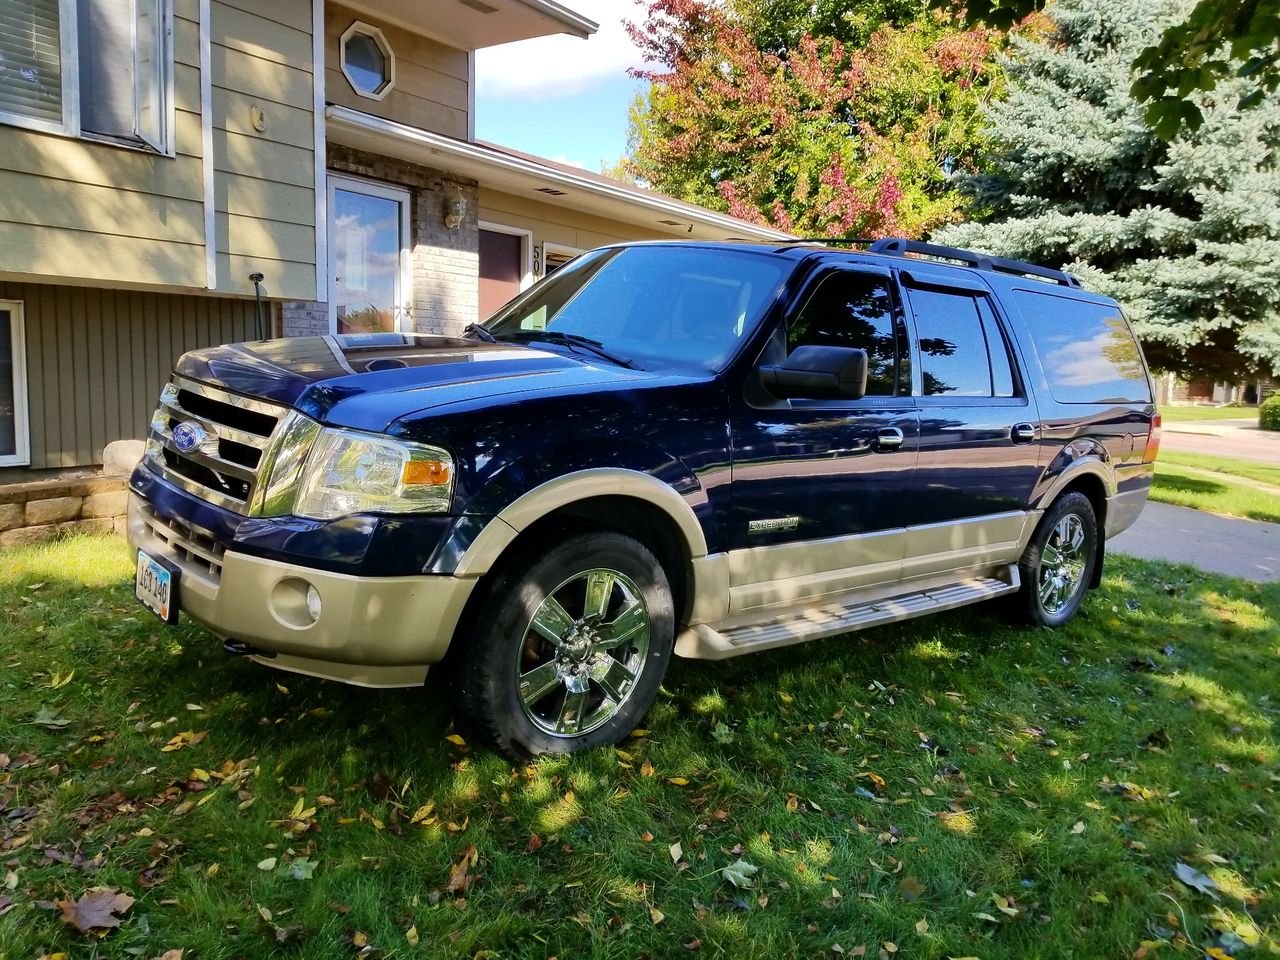 2007 Ford Expedition EL XLT | Sioux Falls, SD, Dark Blue Pearl Clearcoat Metallic (Blue), 4x4